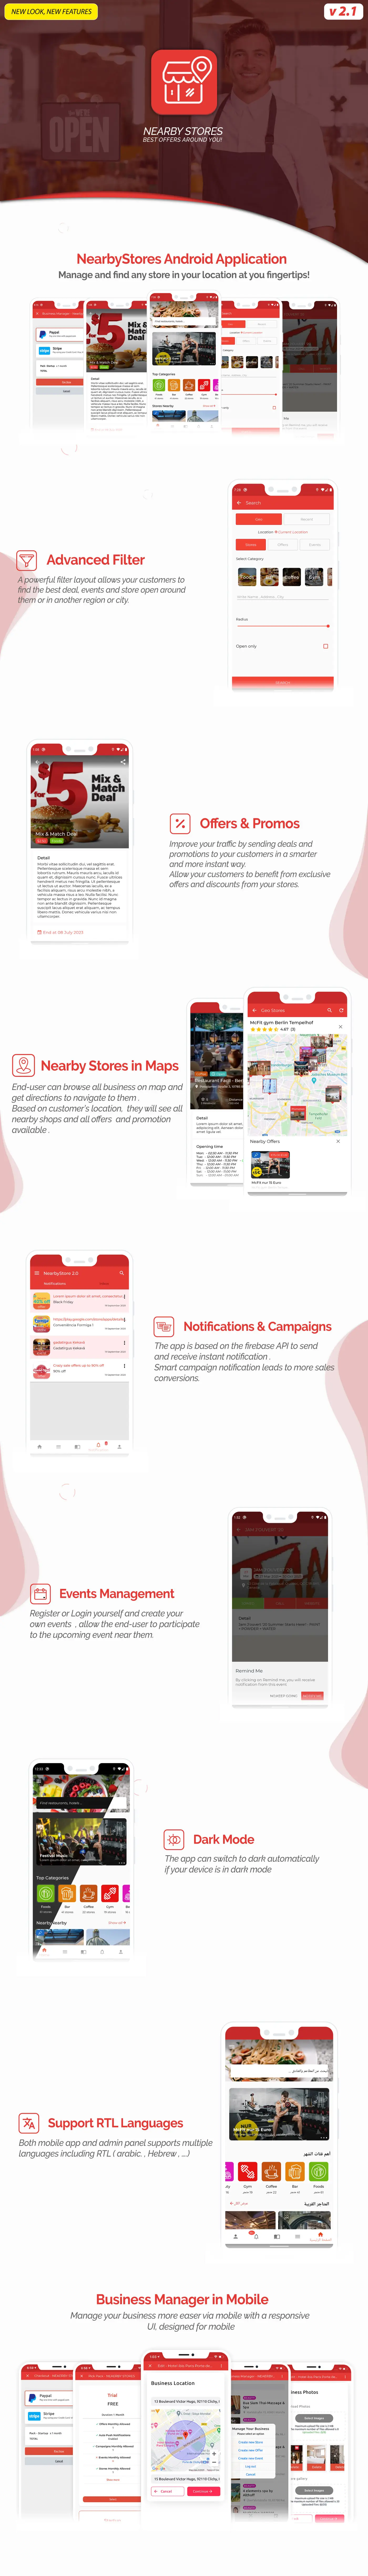 NearbyStores Android - Offers, Events, Multi-Purpose, Restaurant, Market - Subscription & WEB Panel - 2